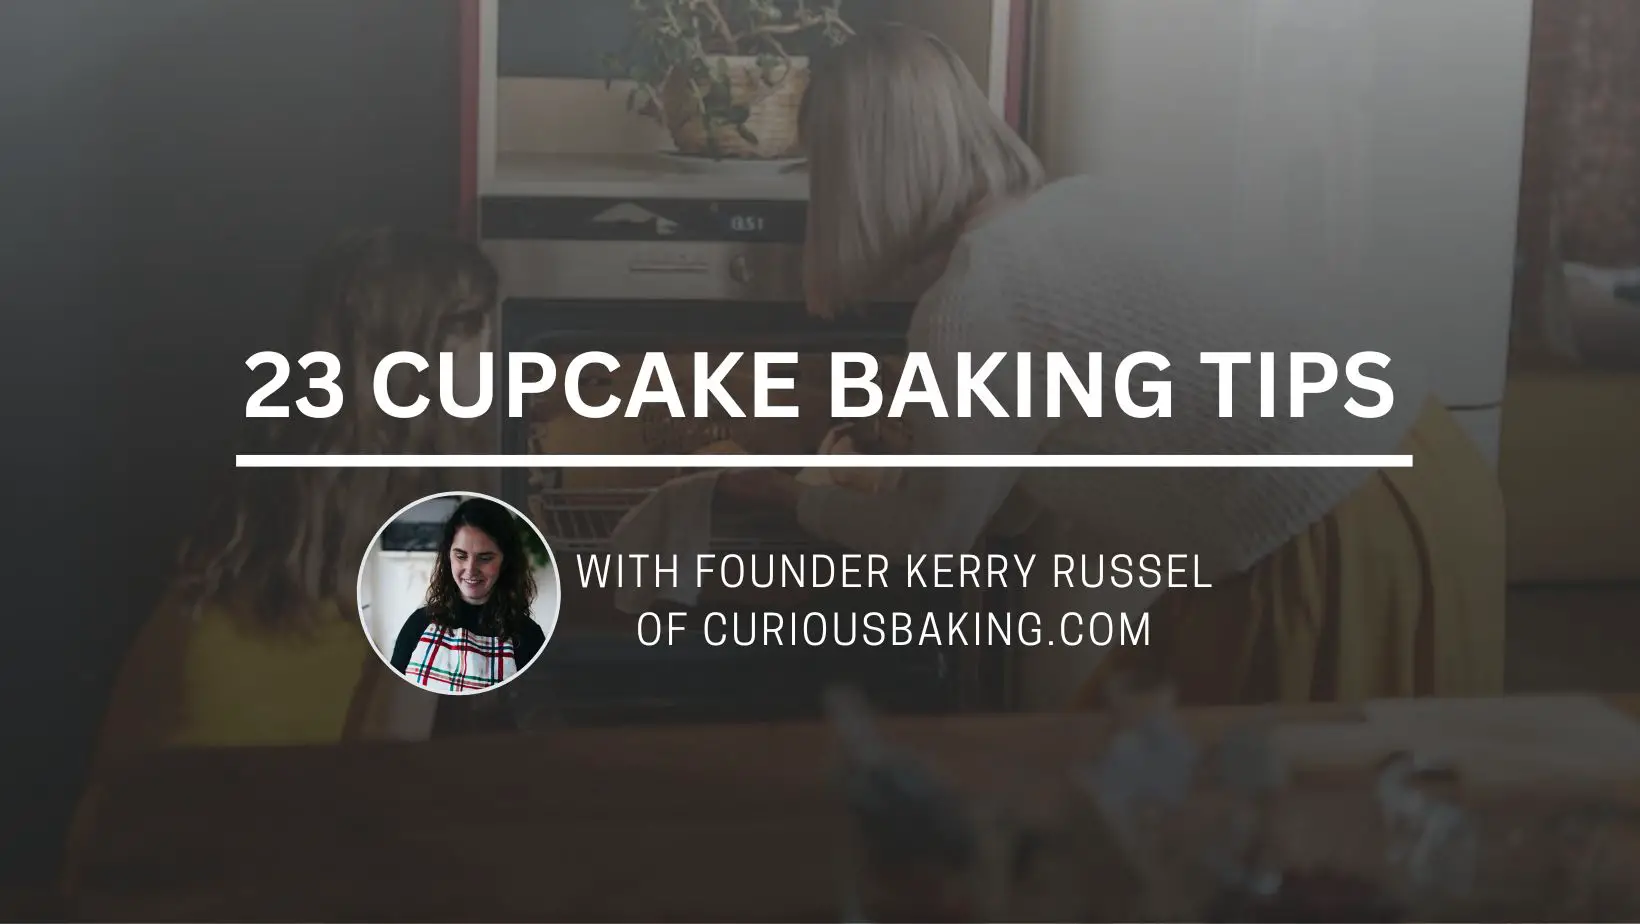 23 Cupcake Baking Tips by CuriousBaking.com